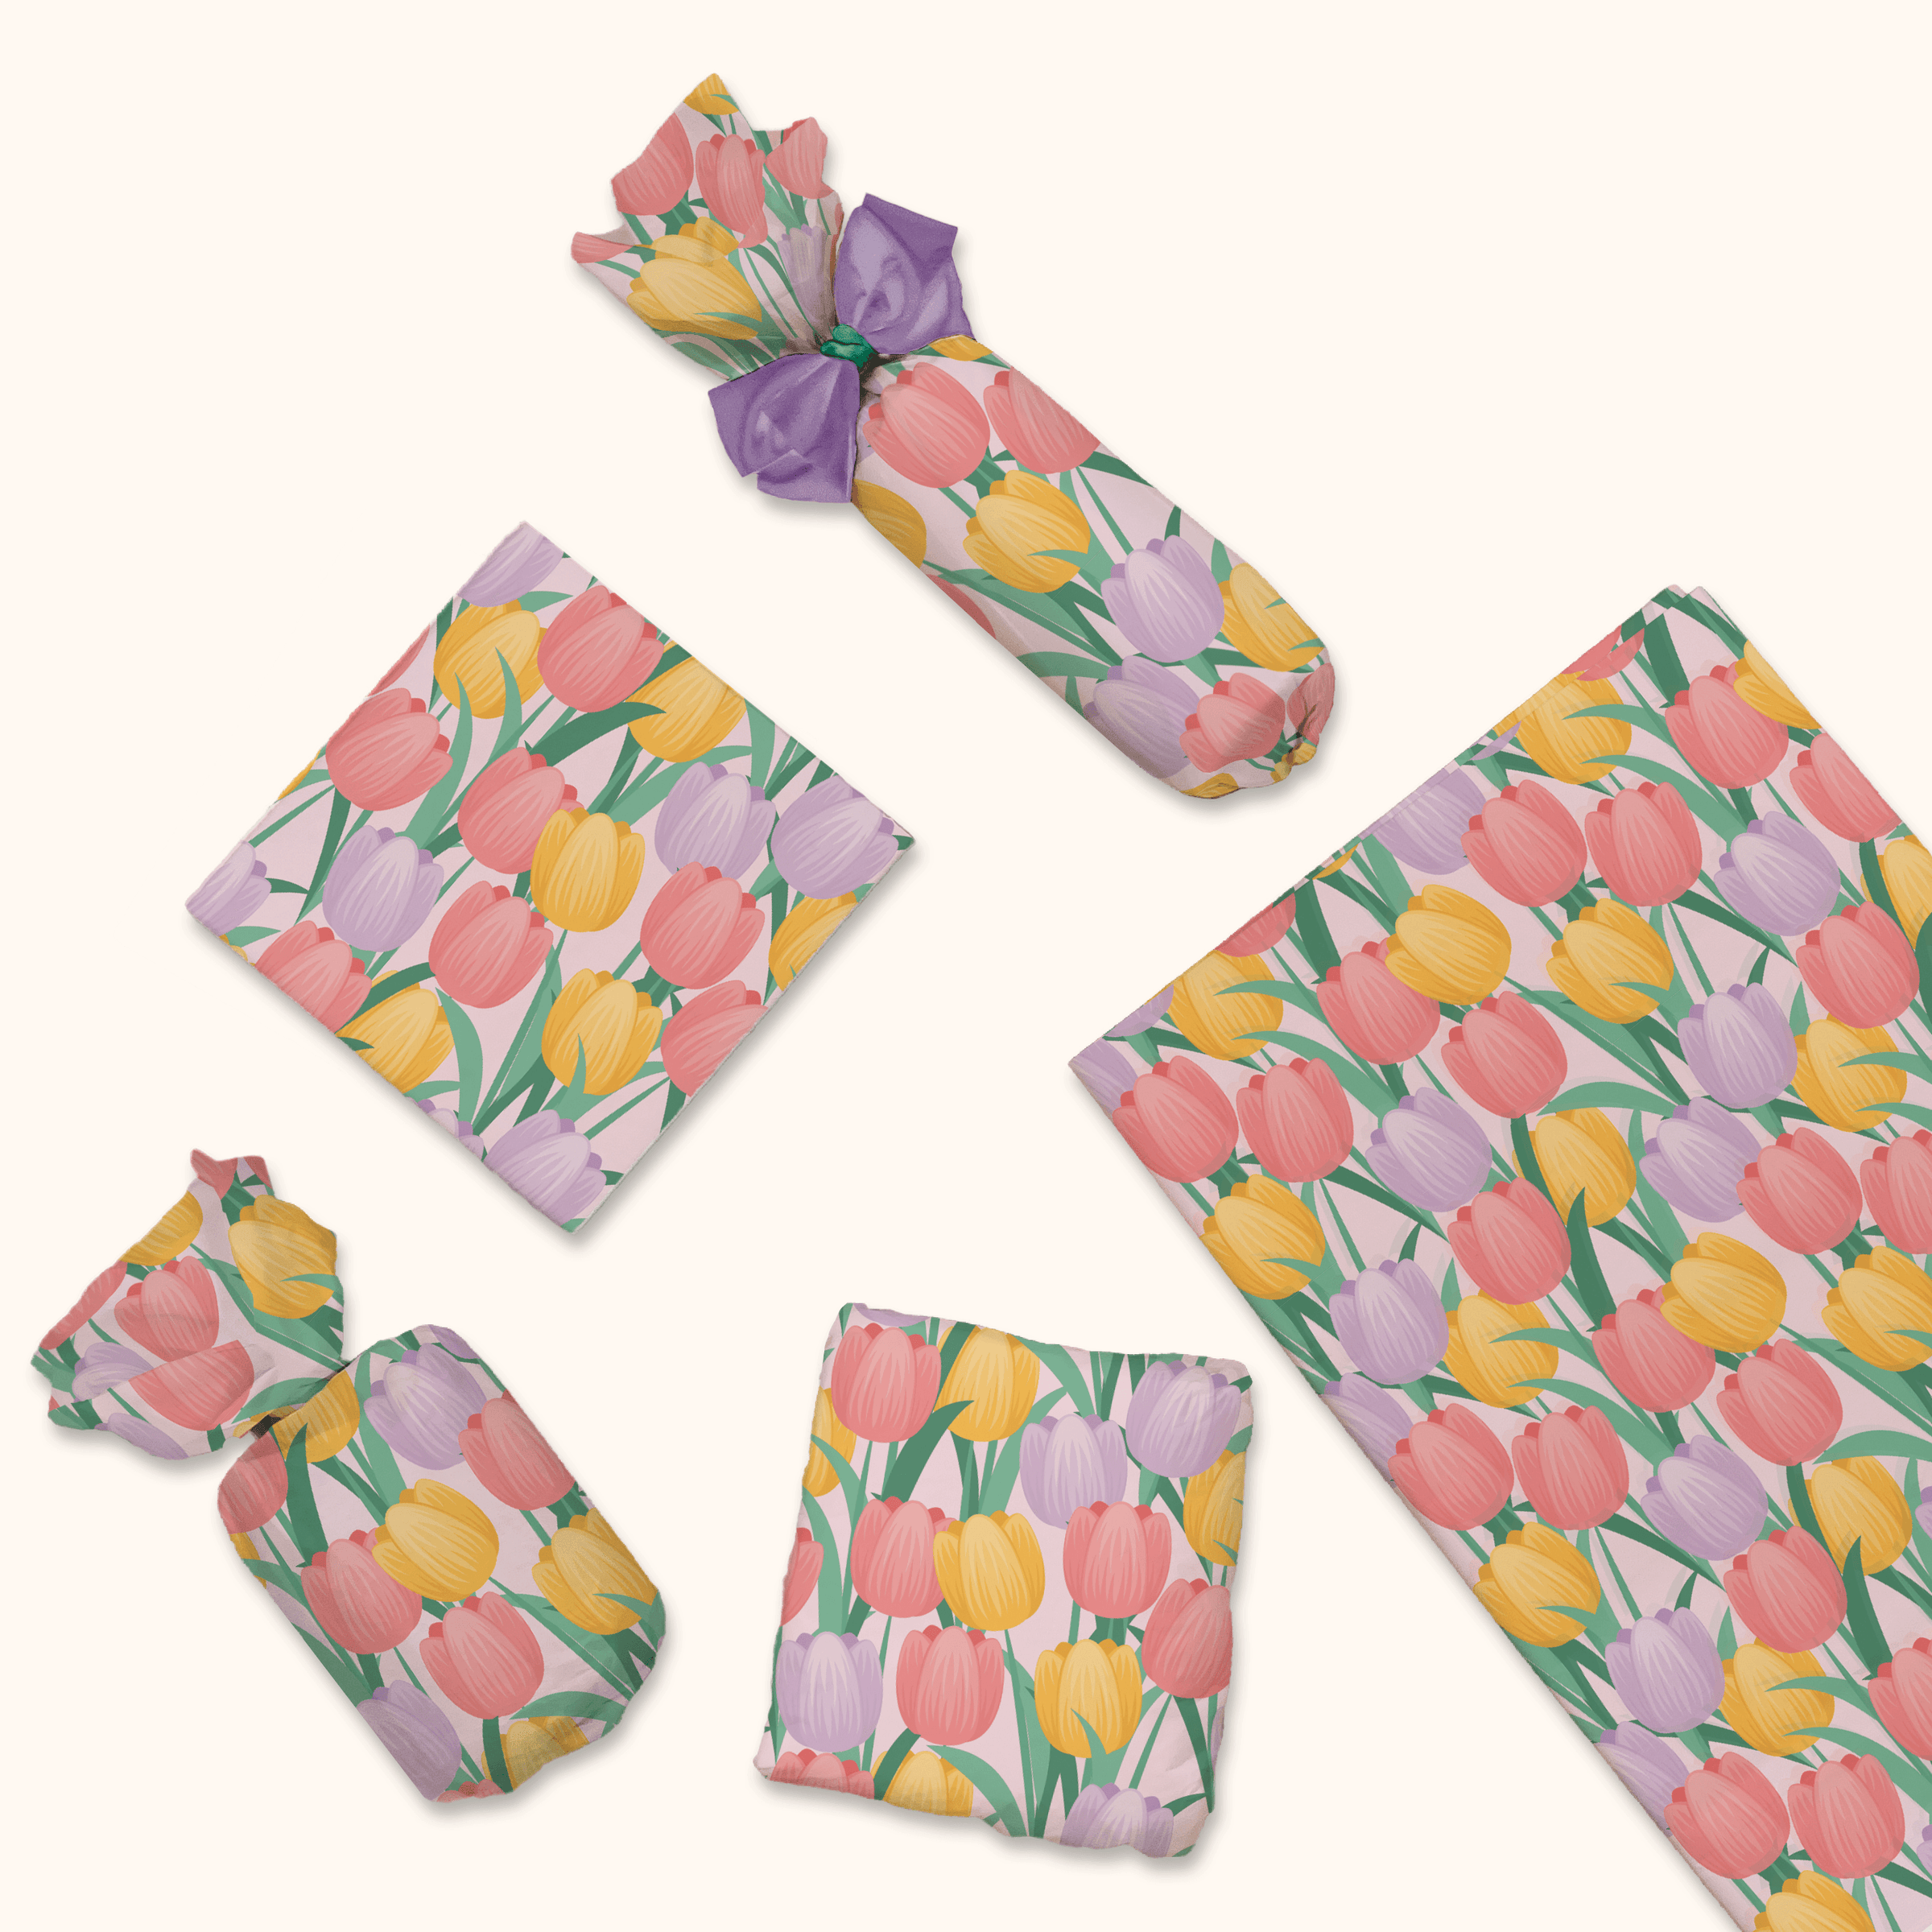 Tulips print tissue wrapping paper pro supply global